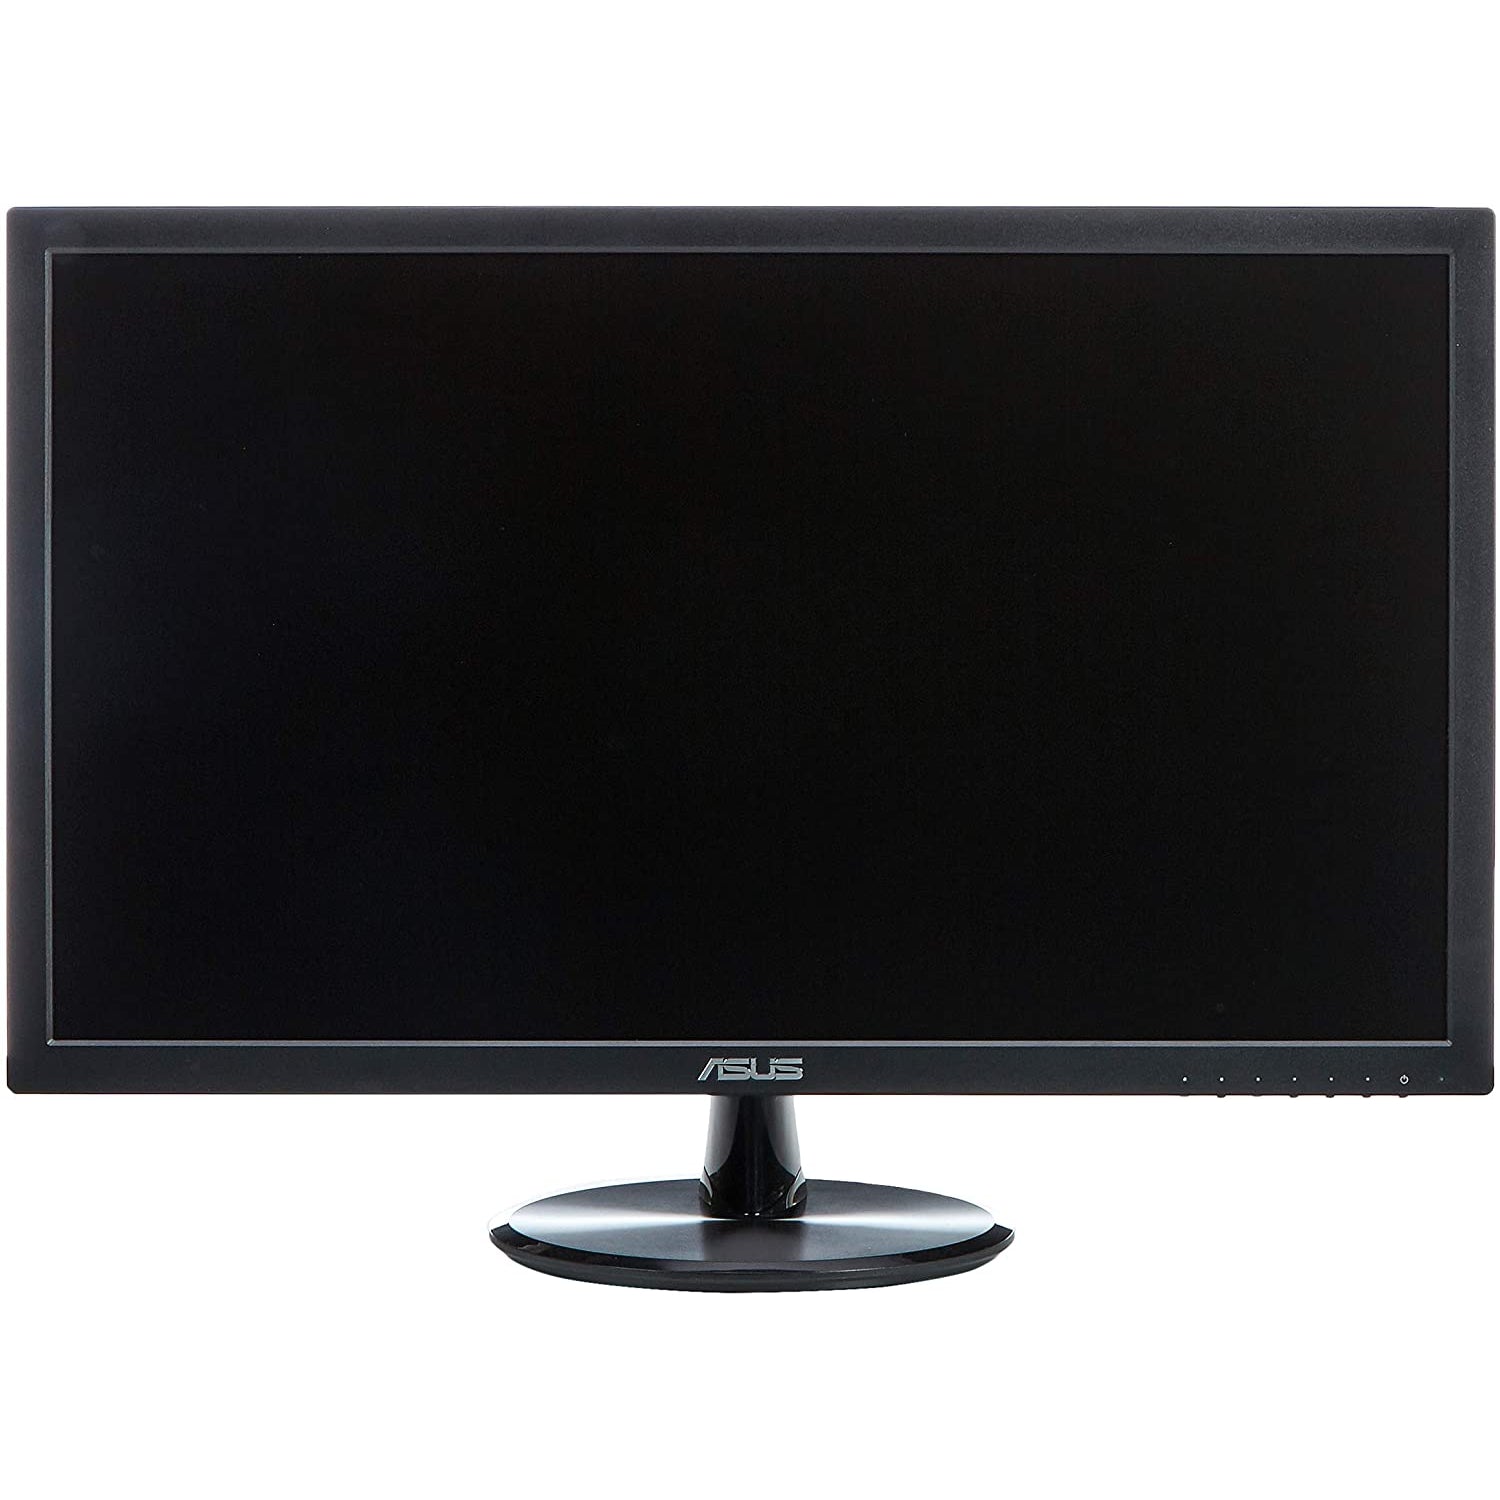 ASUS VP248H, 24 Inch FHD (1920 x 1080) Gaming Monitor, 1 ms, Up to 75 Hz